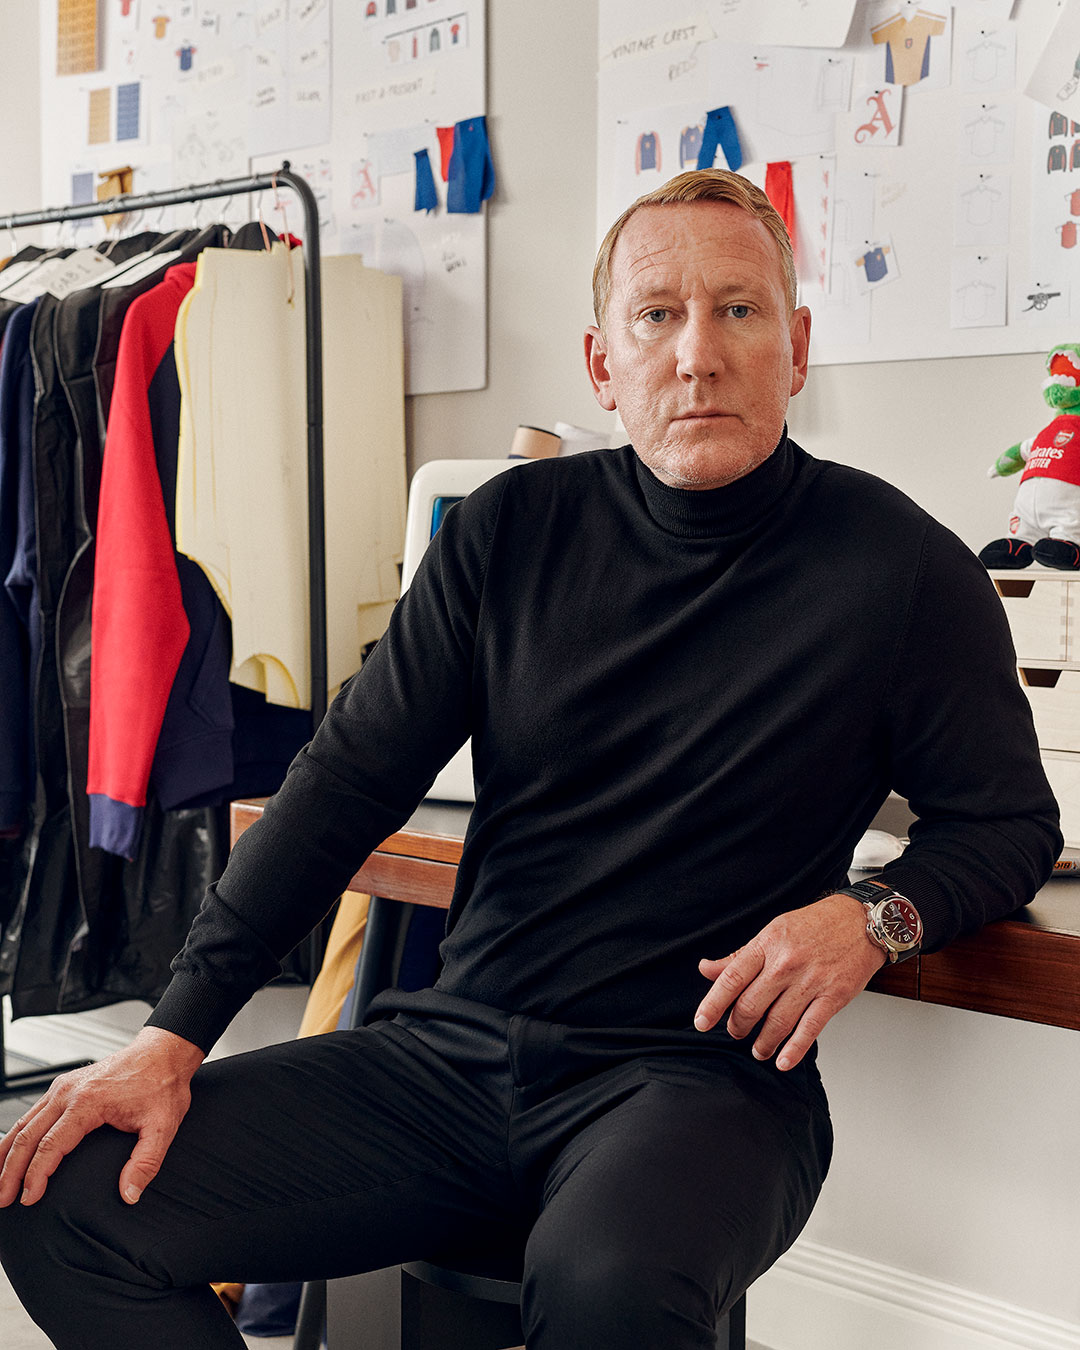 , Arsenal reveal new iconic retro range in hilarious launch video starring Ray Parlour as fashion designer